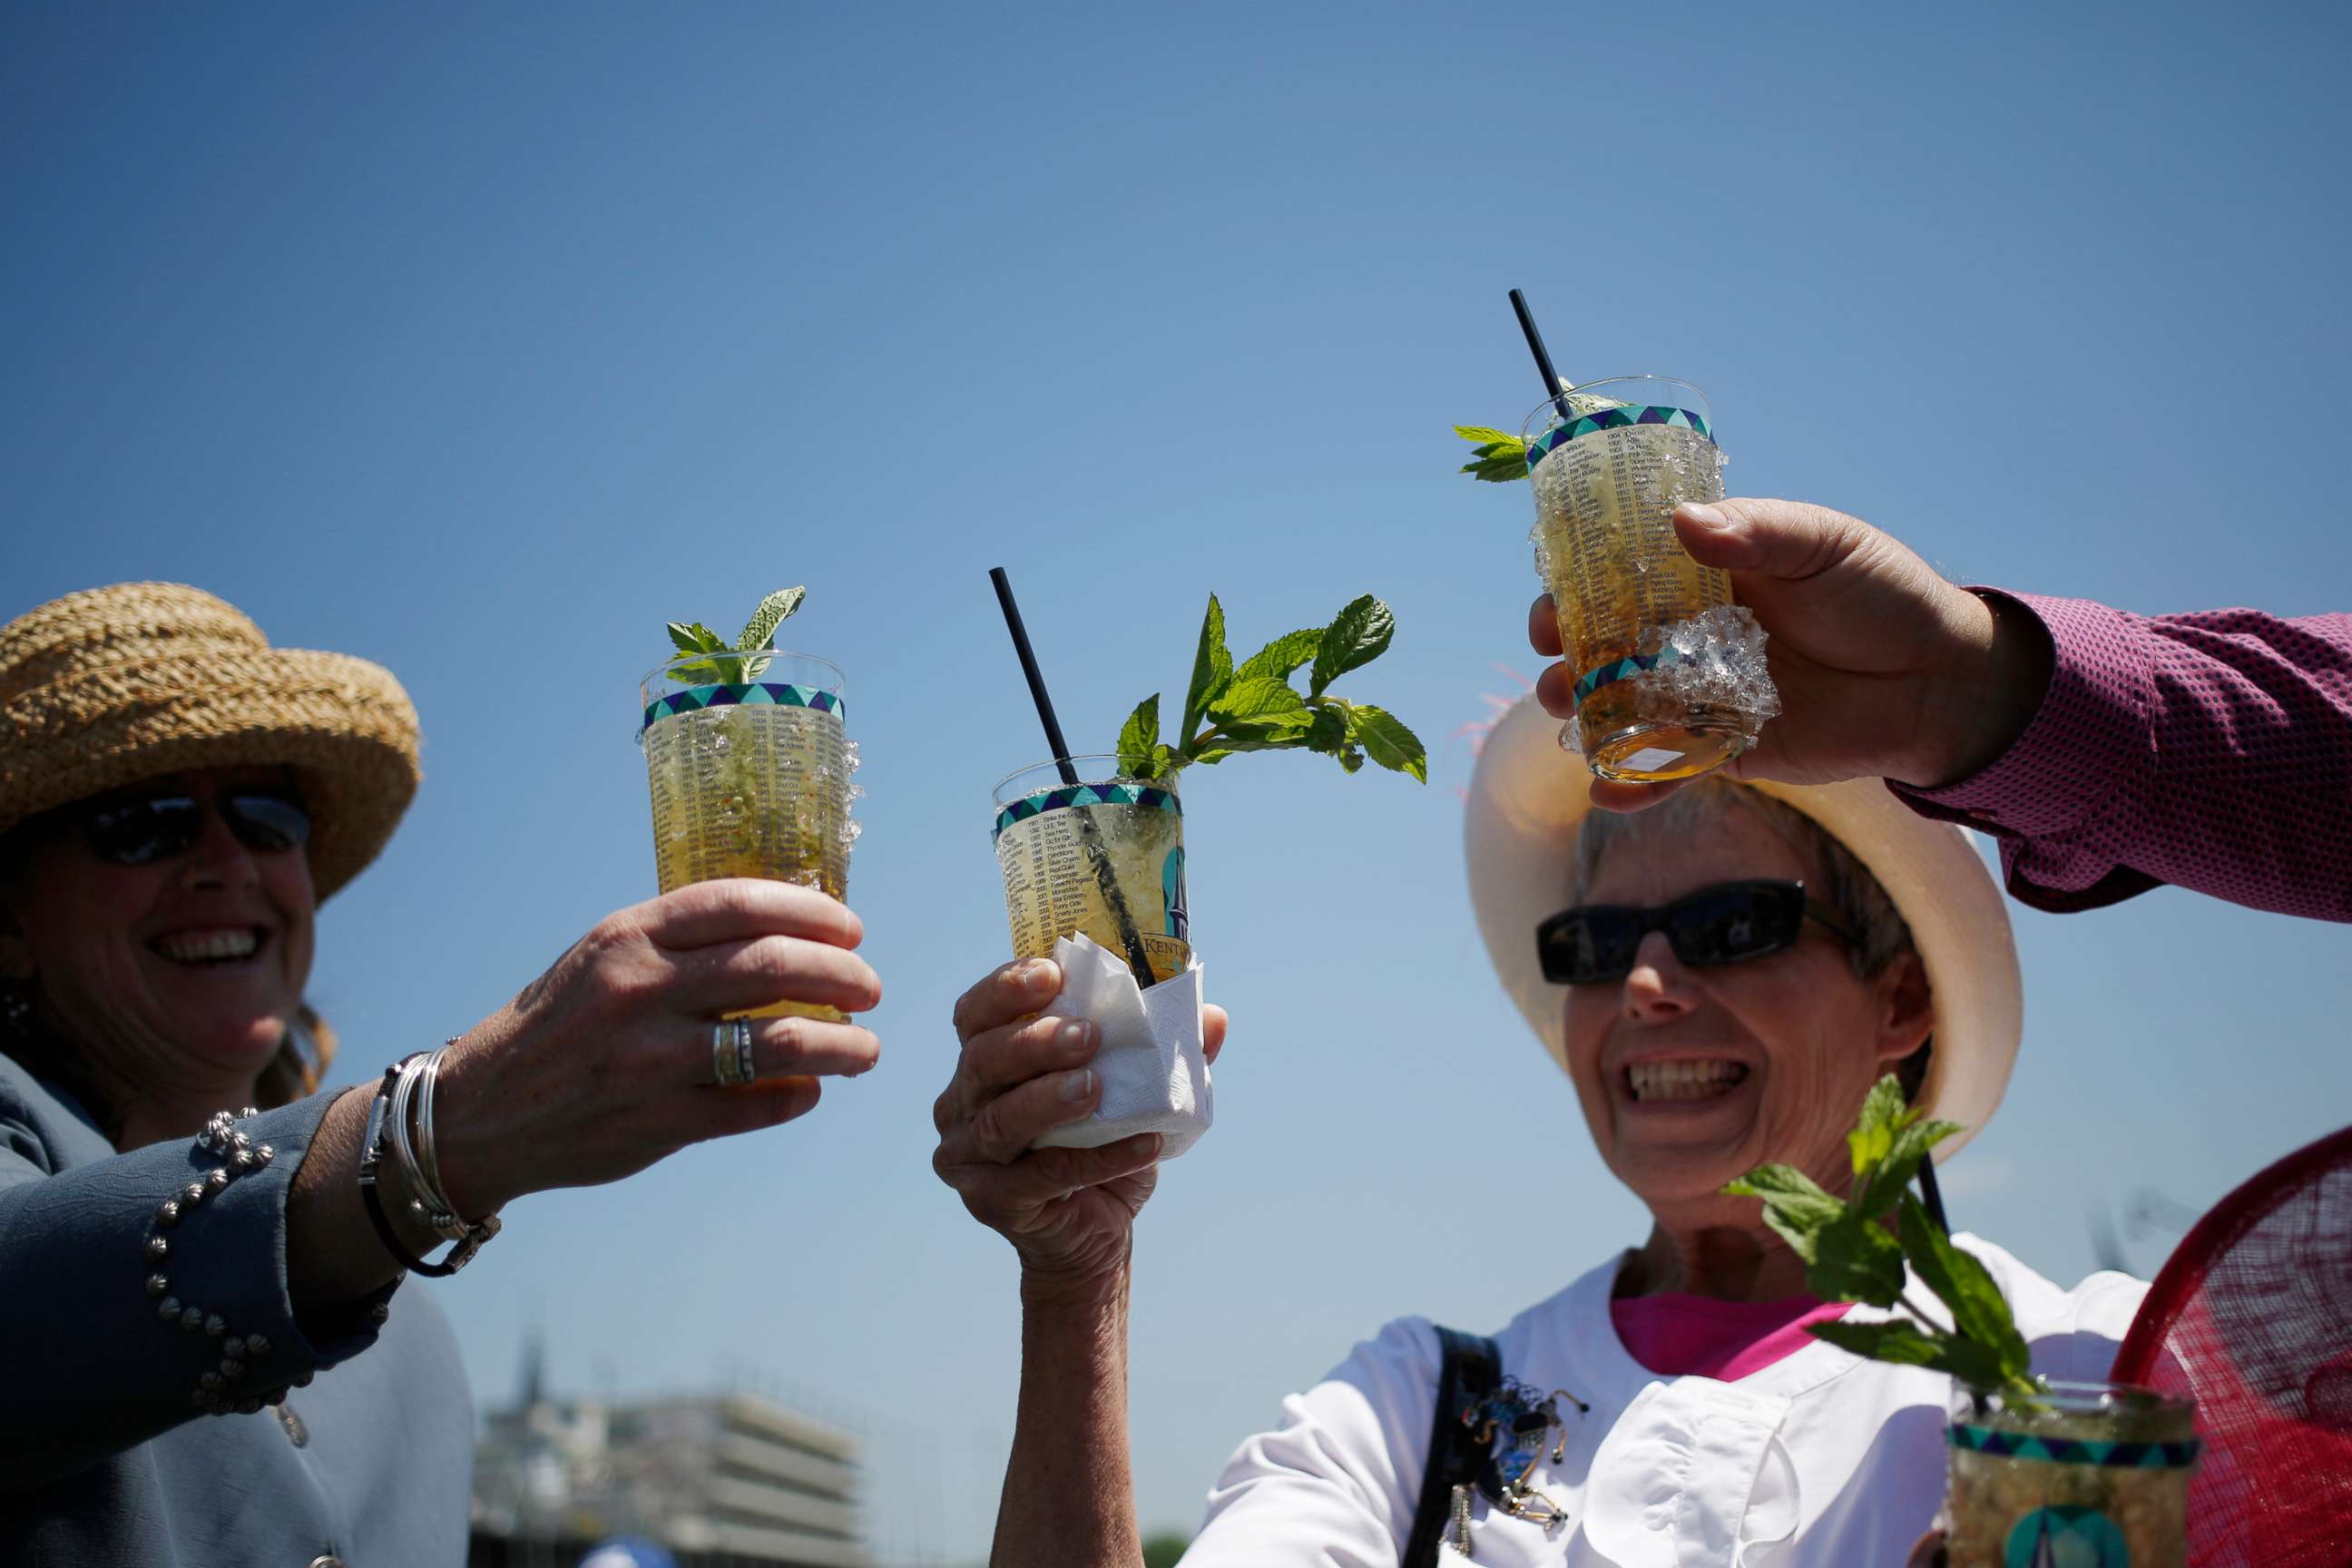 PHOTO: Racegoers who traveled to Churchill Downs from Colorado toast their mint julep bourbon cocktails while watching horse races on the eve of the Kentucky Derby in Louisville, Ky., May 1, 2015.